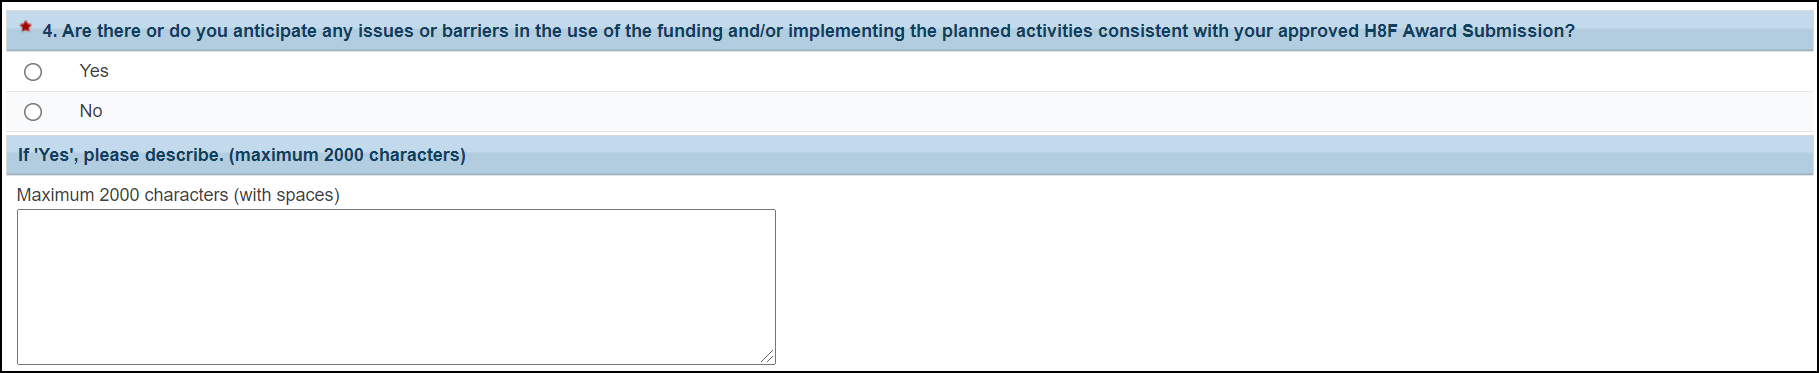 Question 4 on the ARP H8F progress report form